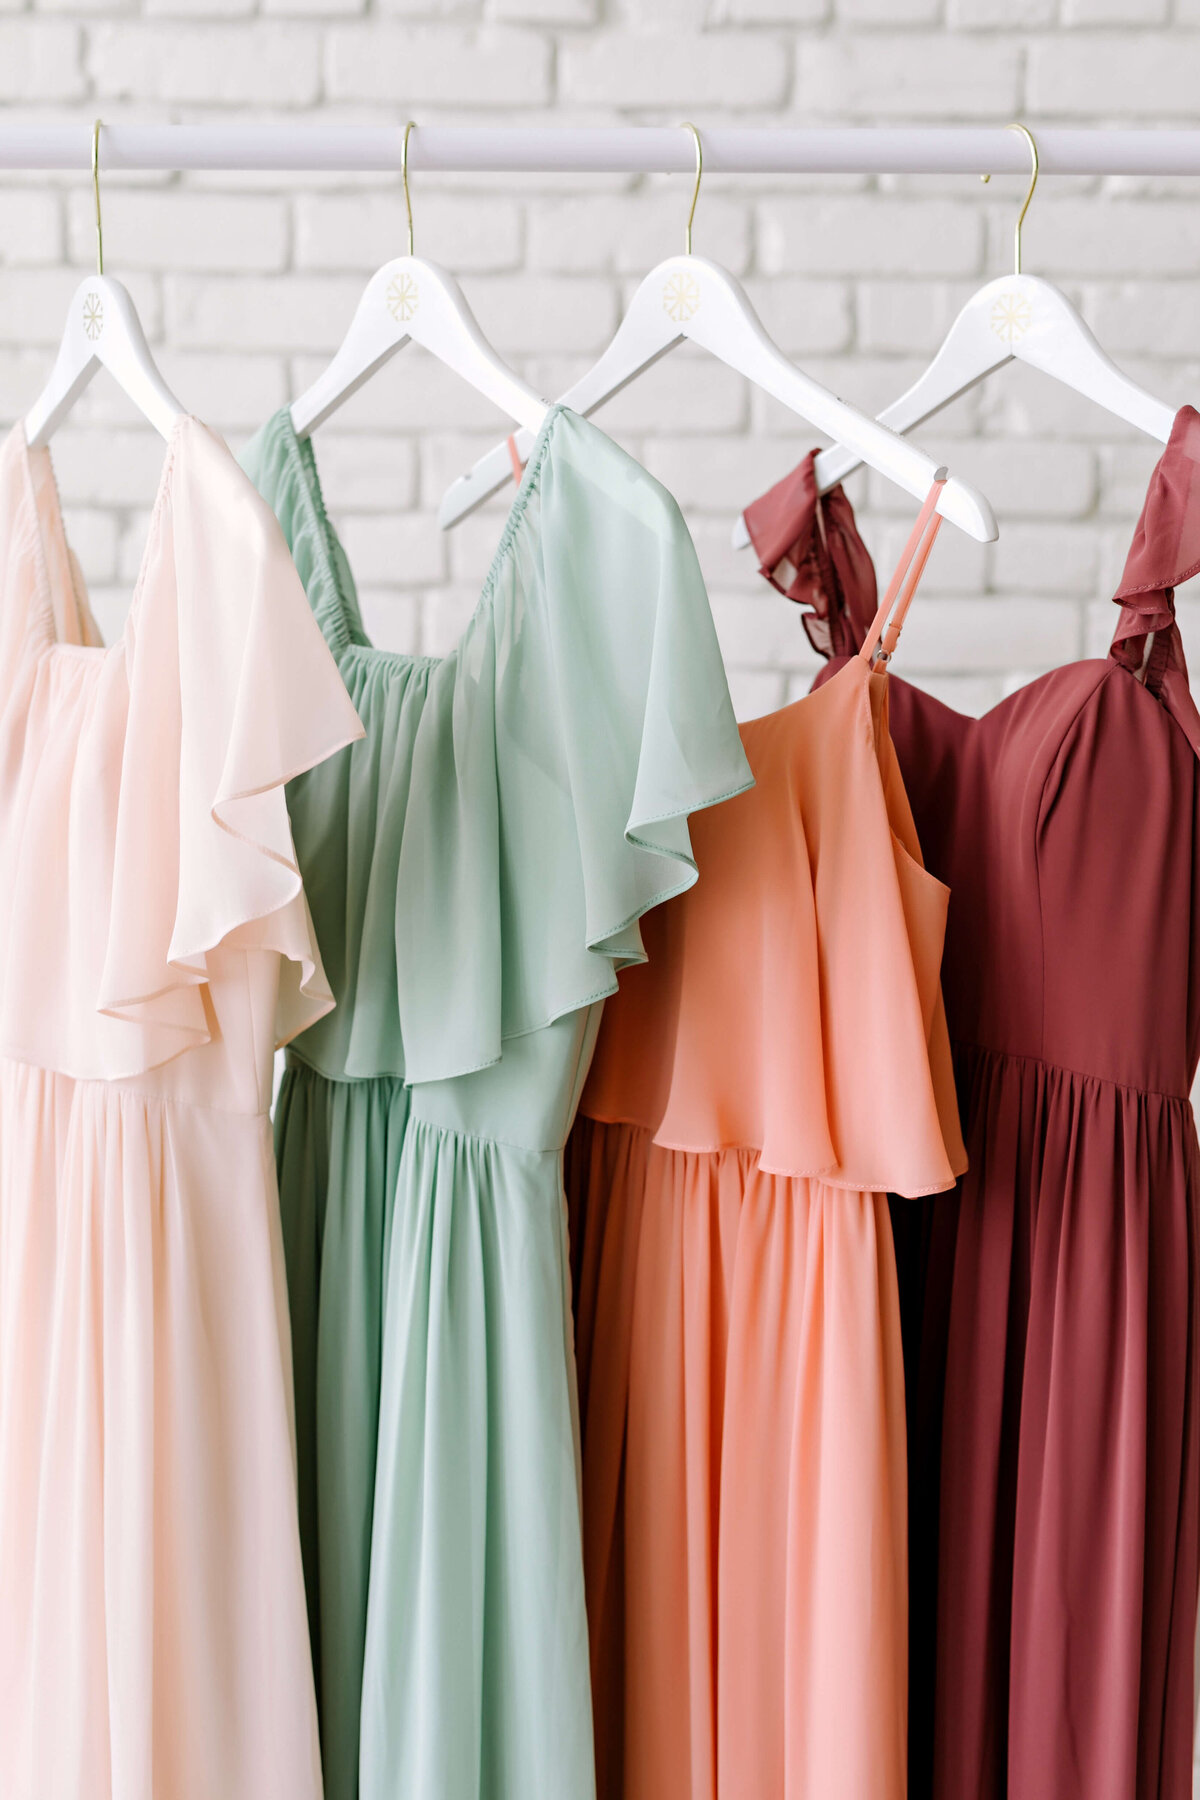 A fun branding session for Revelry Bridesmaids Dresses, showing off their mix and match dresses and separates